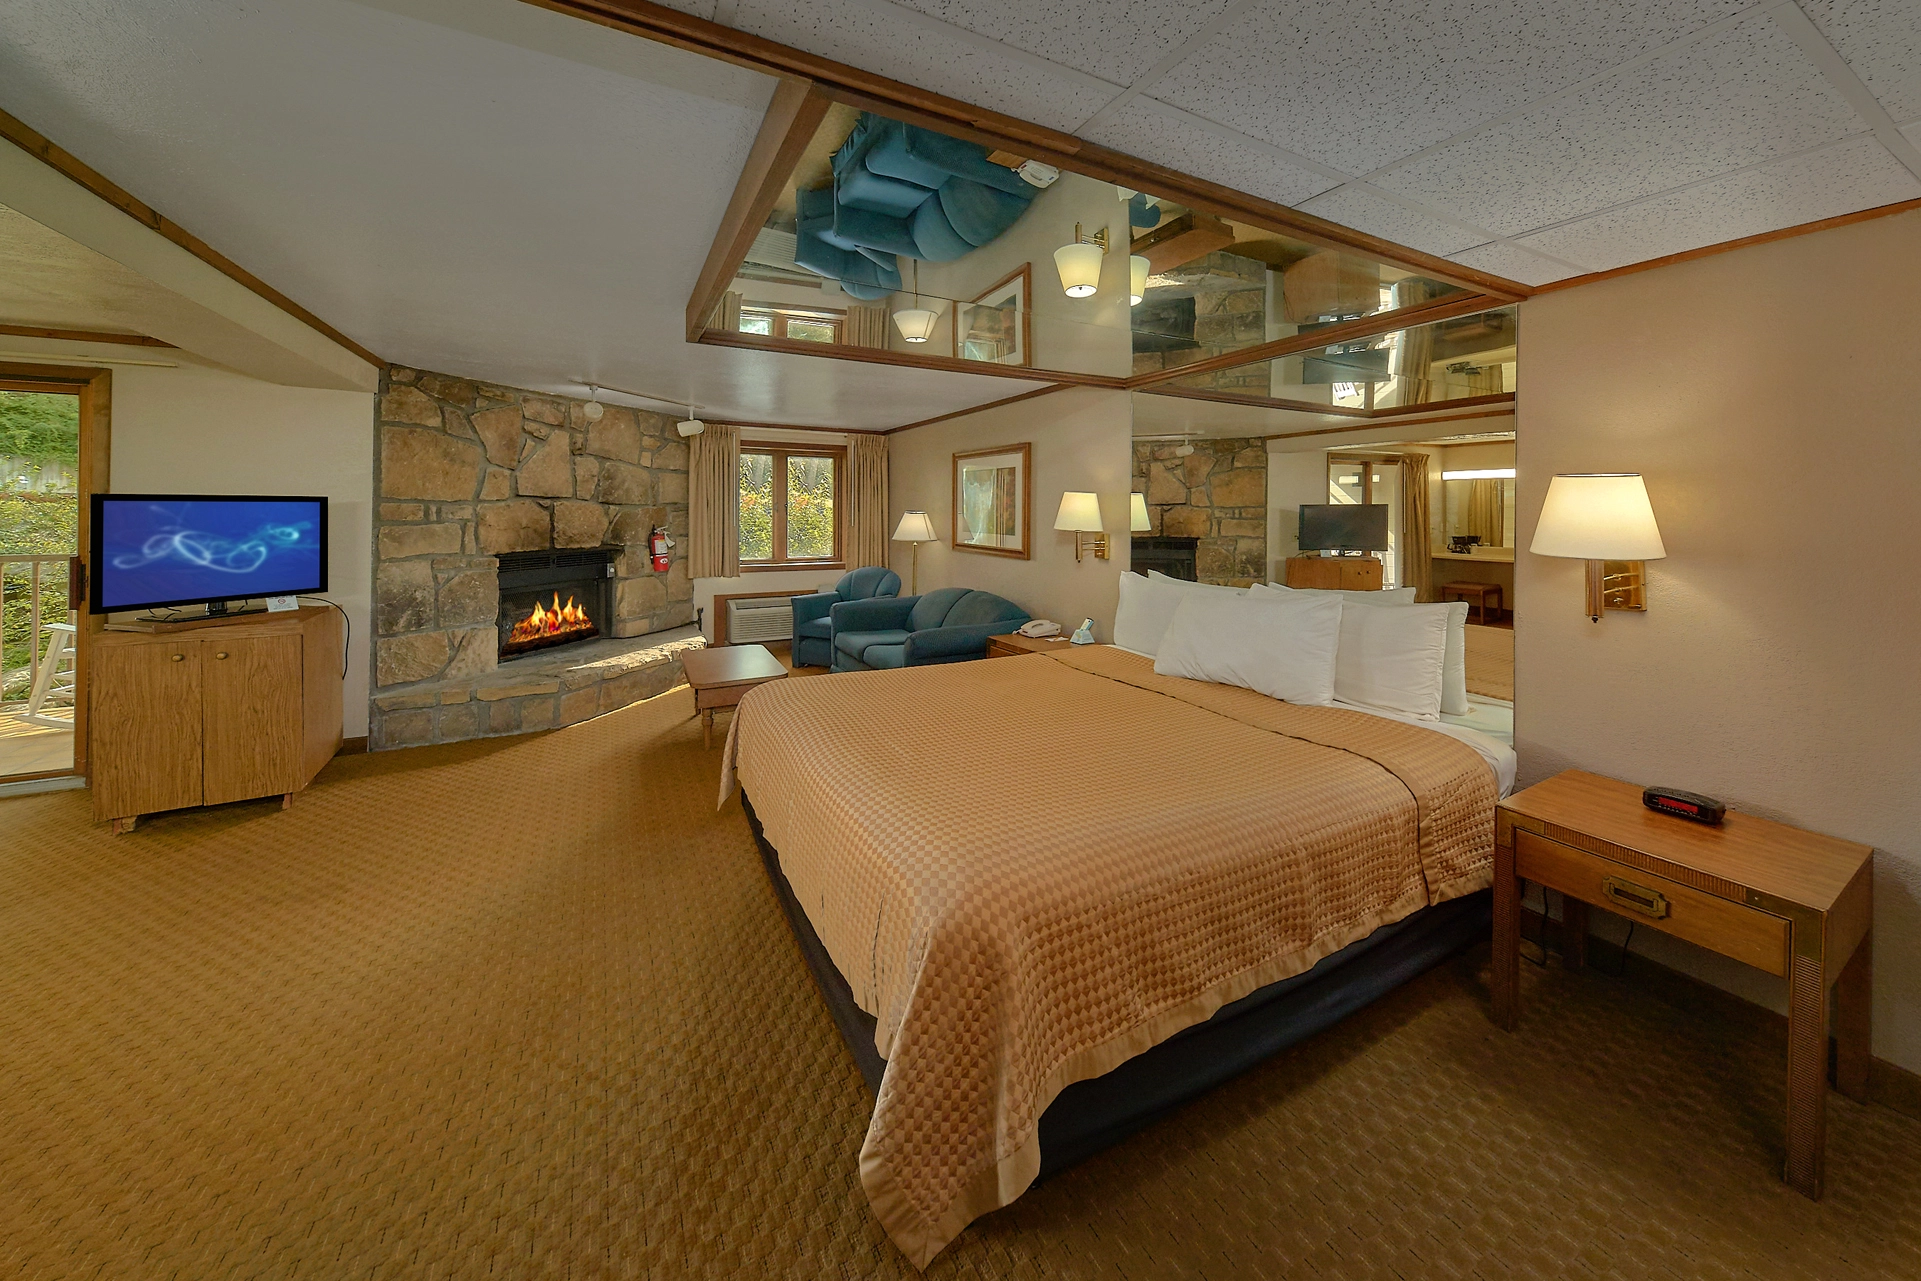 King bed and fireplace in Creekside Jacuzzi Room